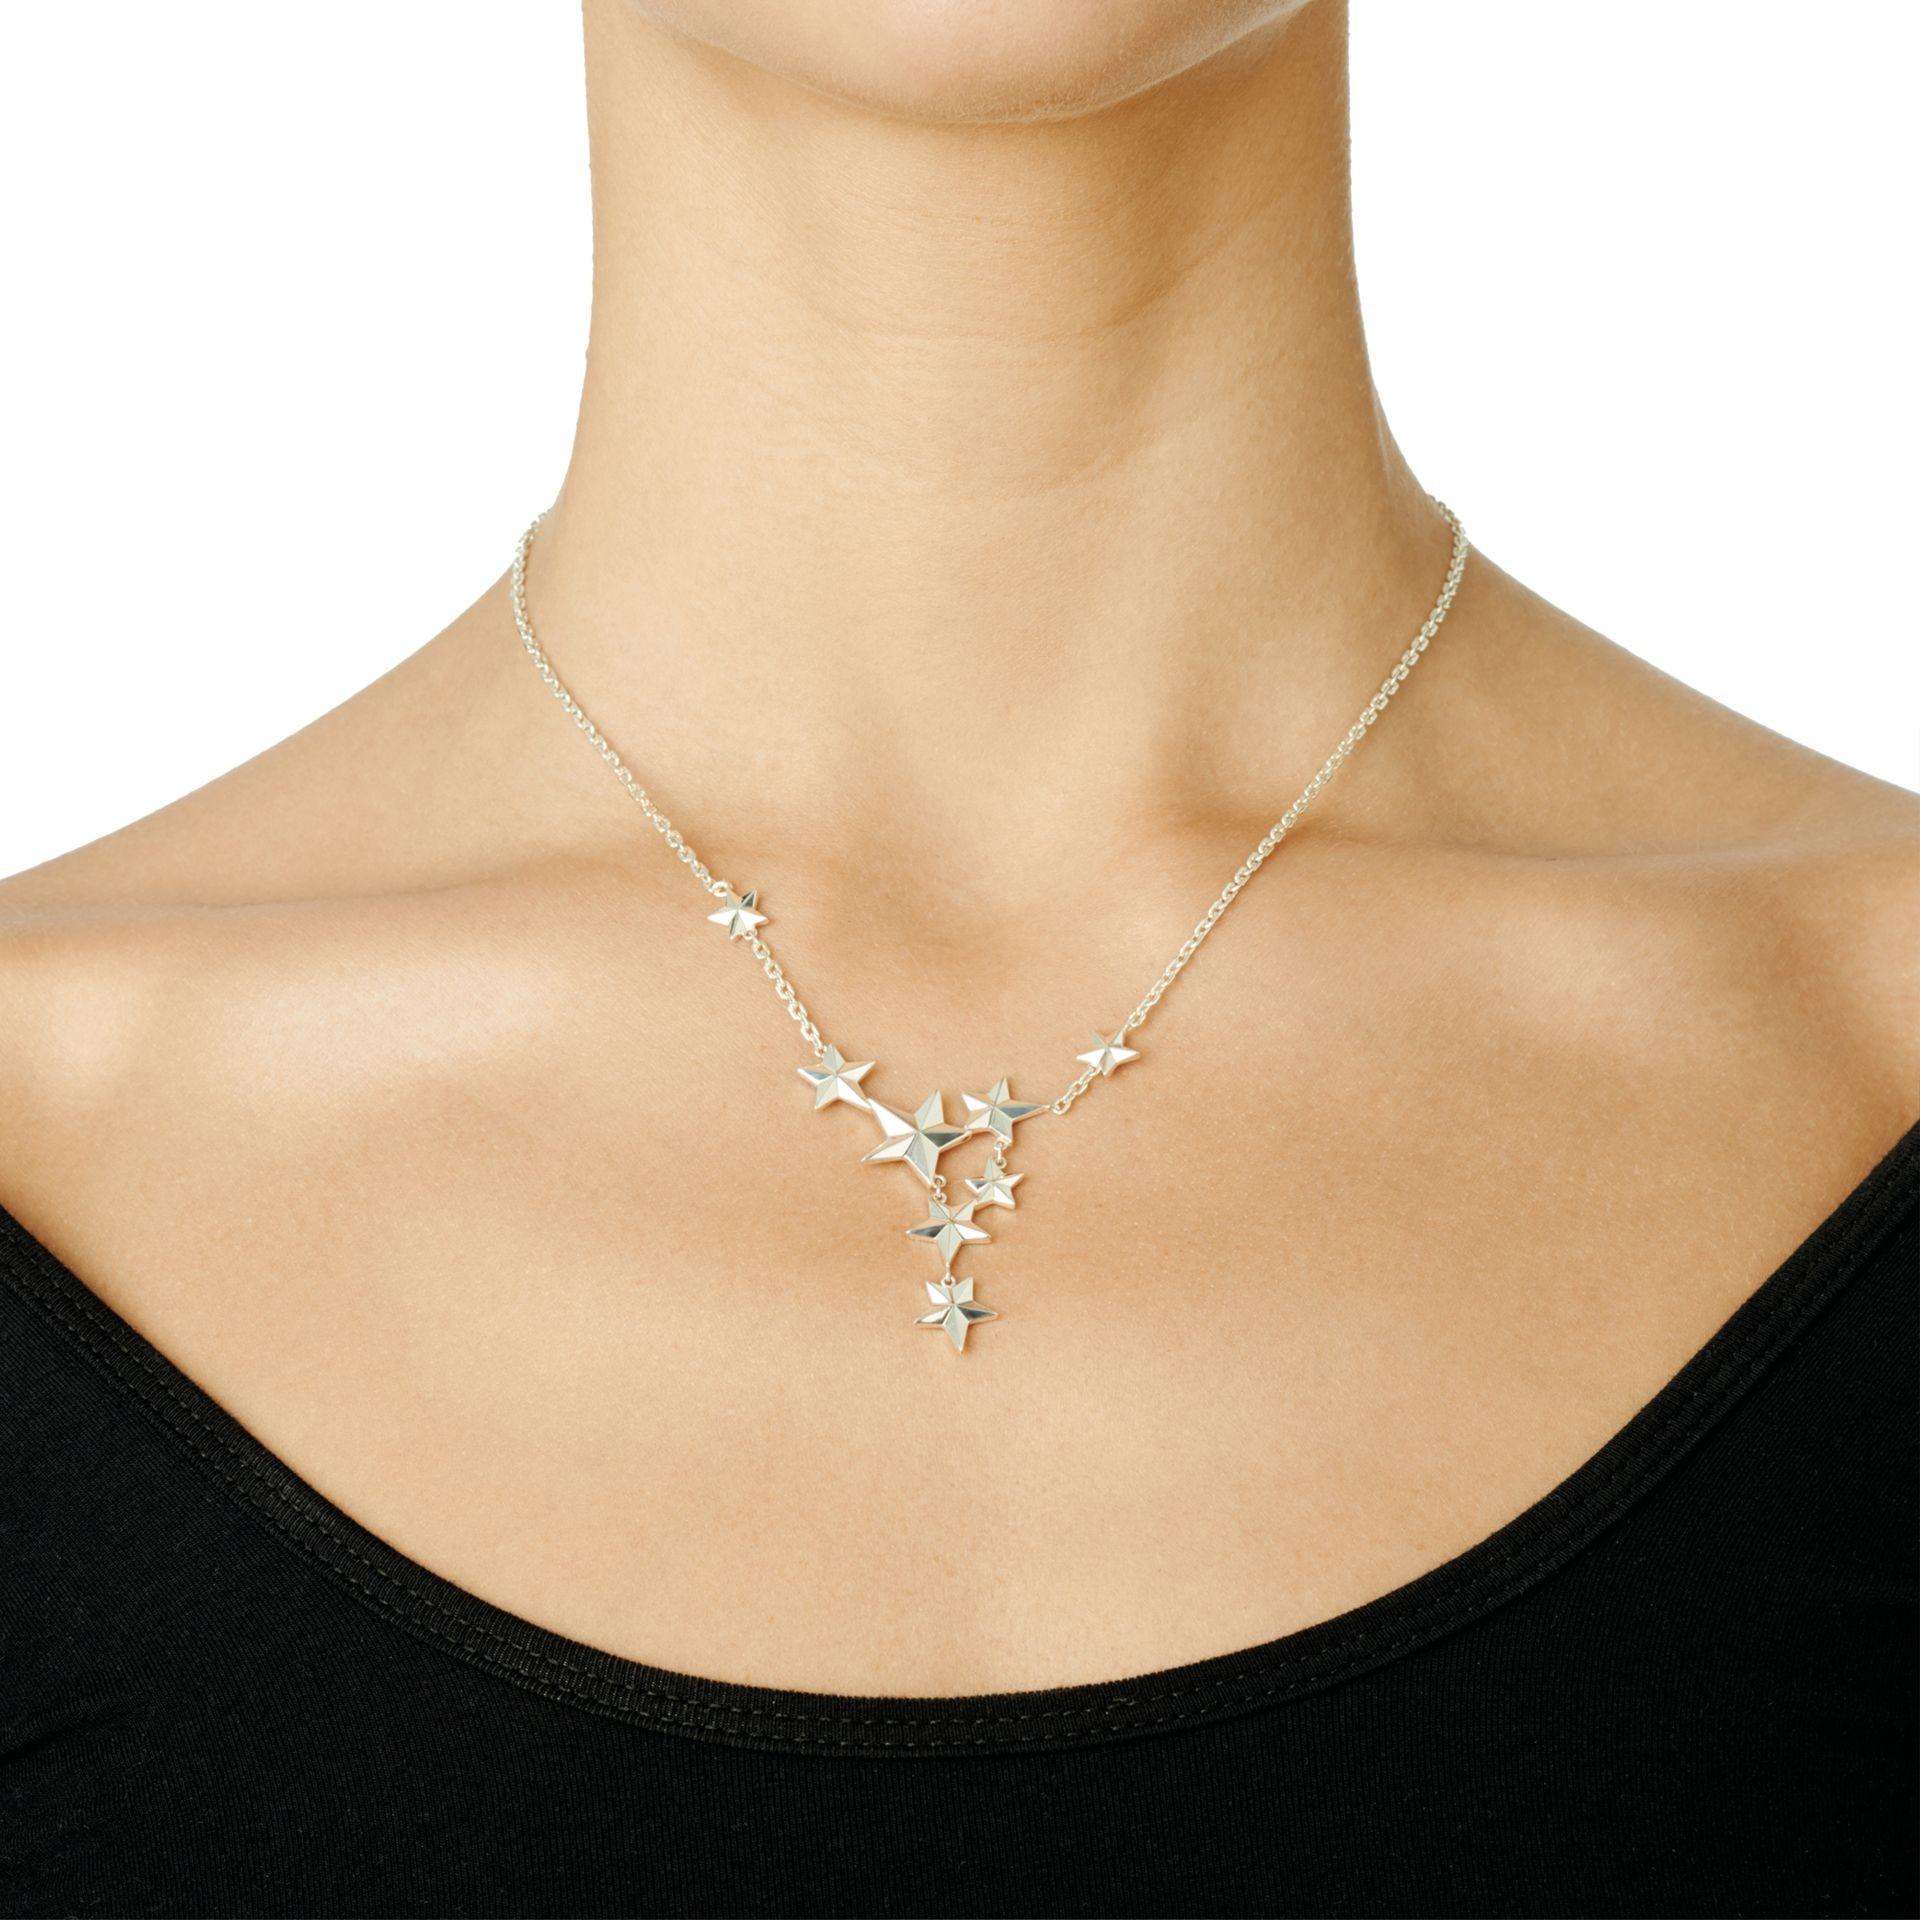 Catch A Falling Star Necklace